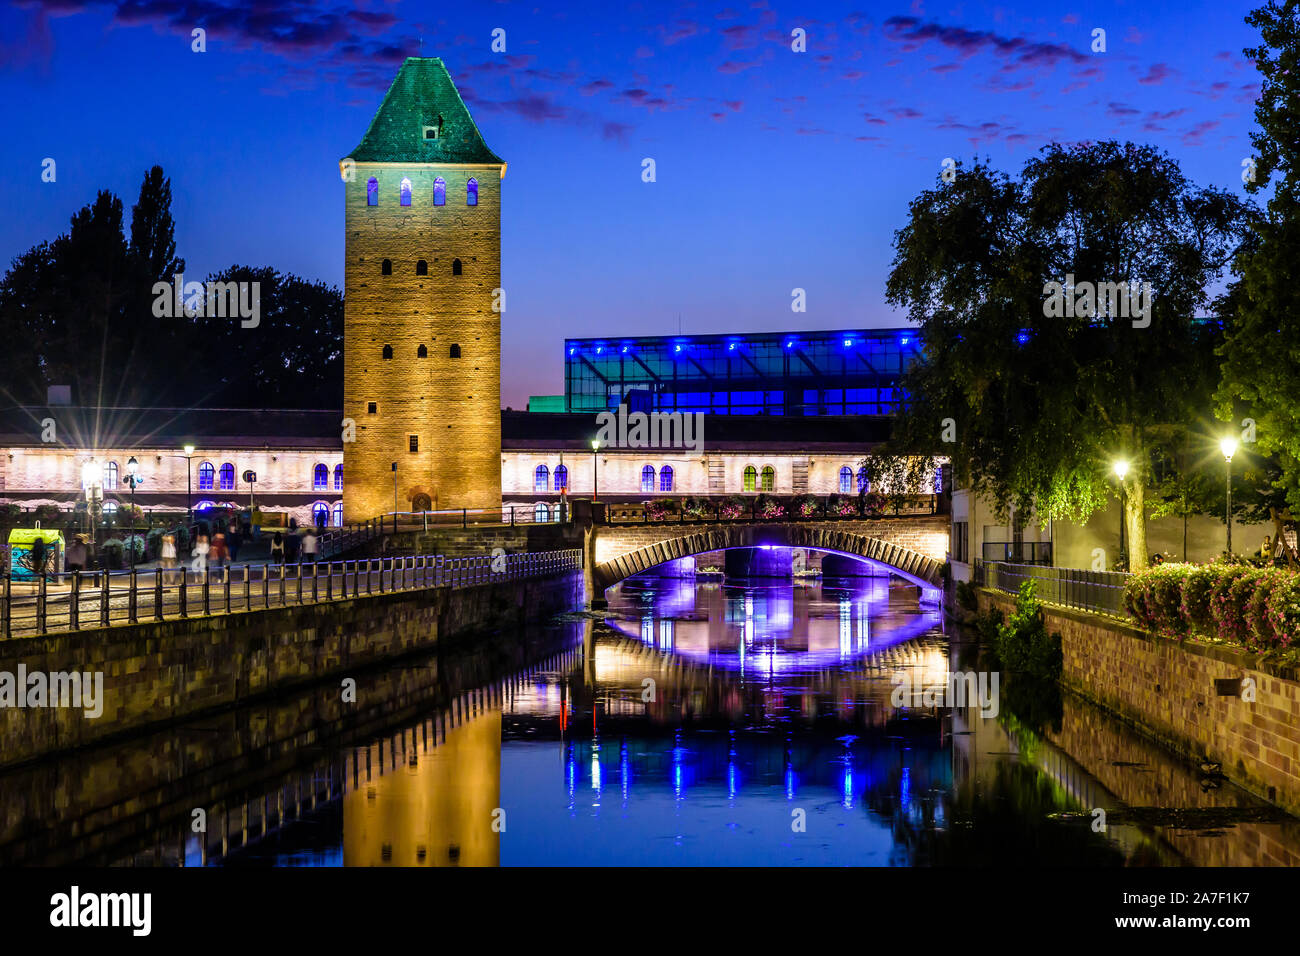 The Ponts Couverts and Vauban Dam on the river Ill in the Petite France quarter in Strasbourg, France, reflecting in the still waters at nightfall. Stock Photo